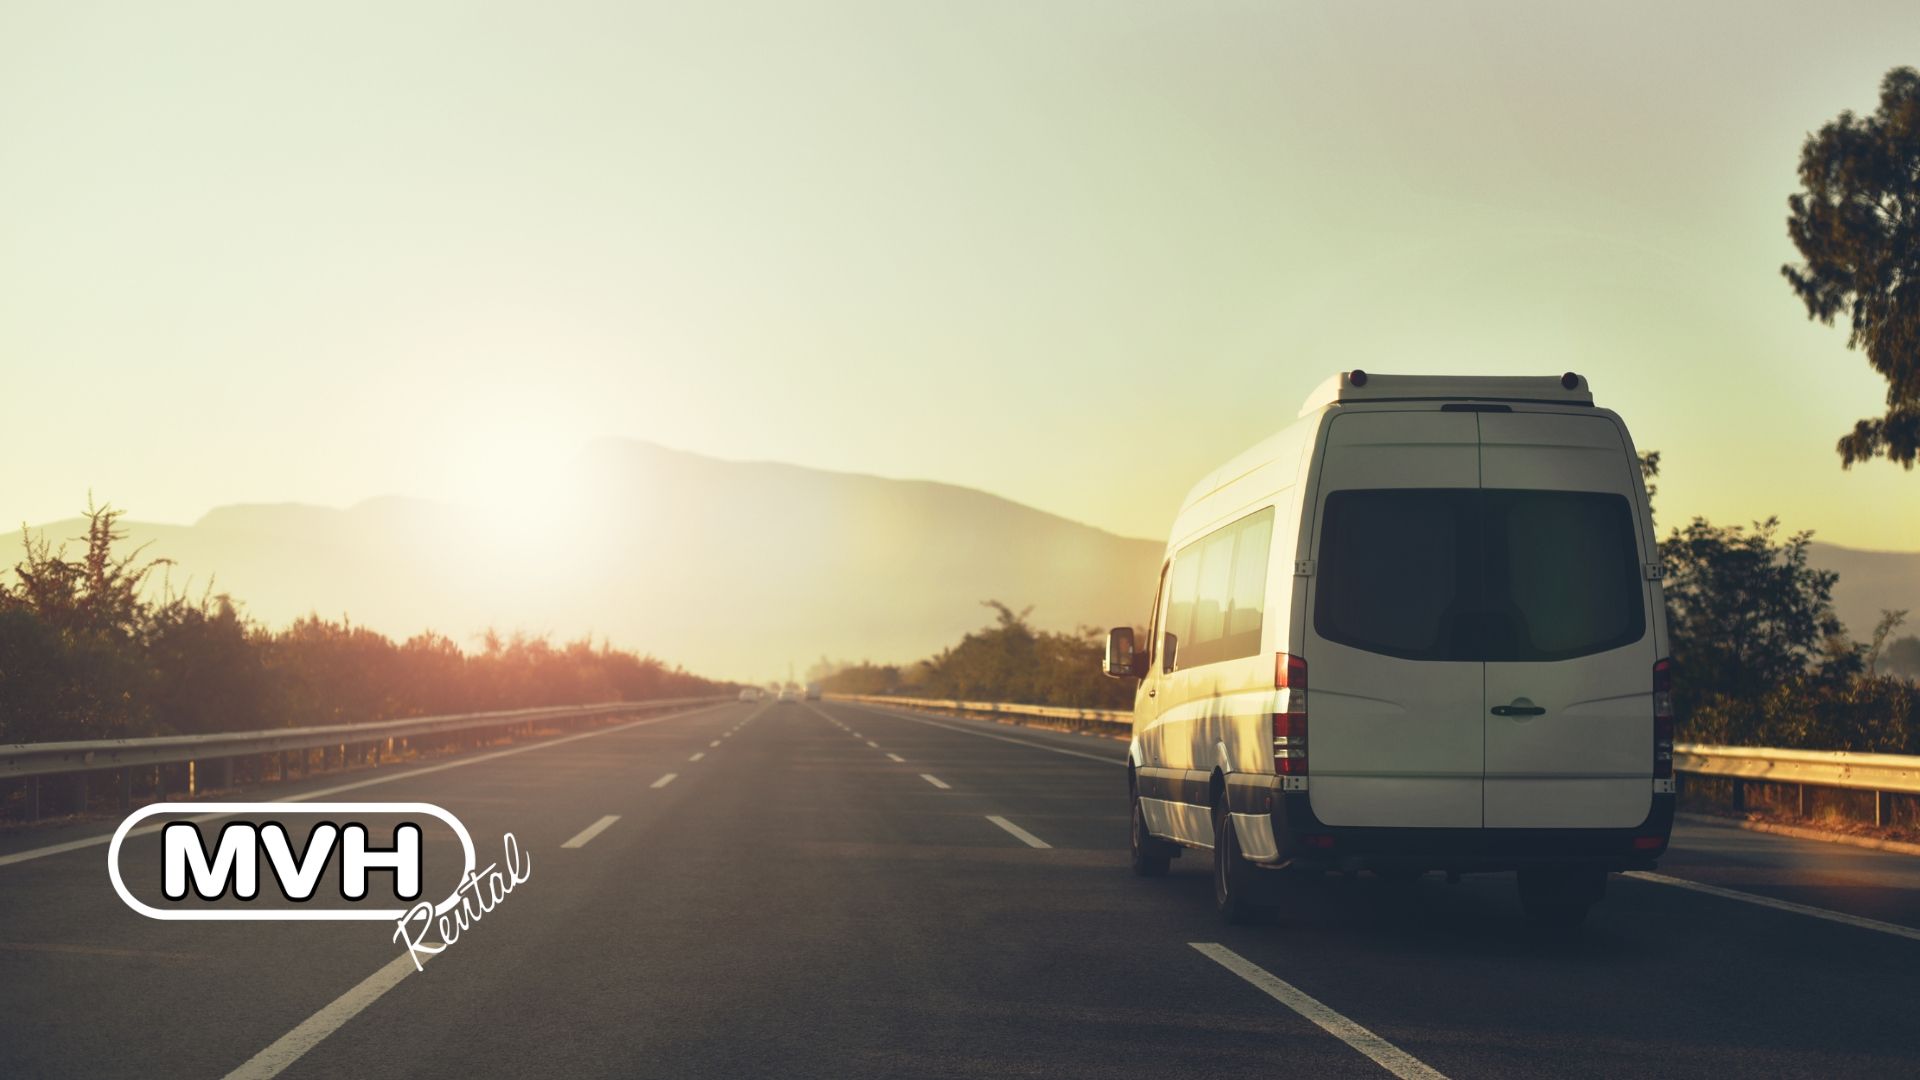 Choosing a minibus over multiple cars could transform your trip for the better – cutting costs, stress and emissions in a pro-wellbeing triple whammy.